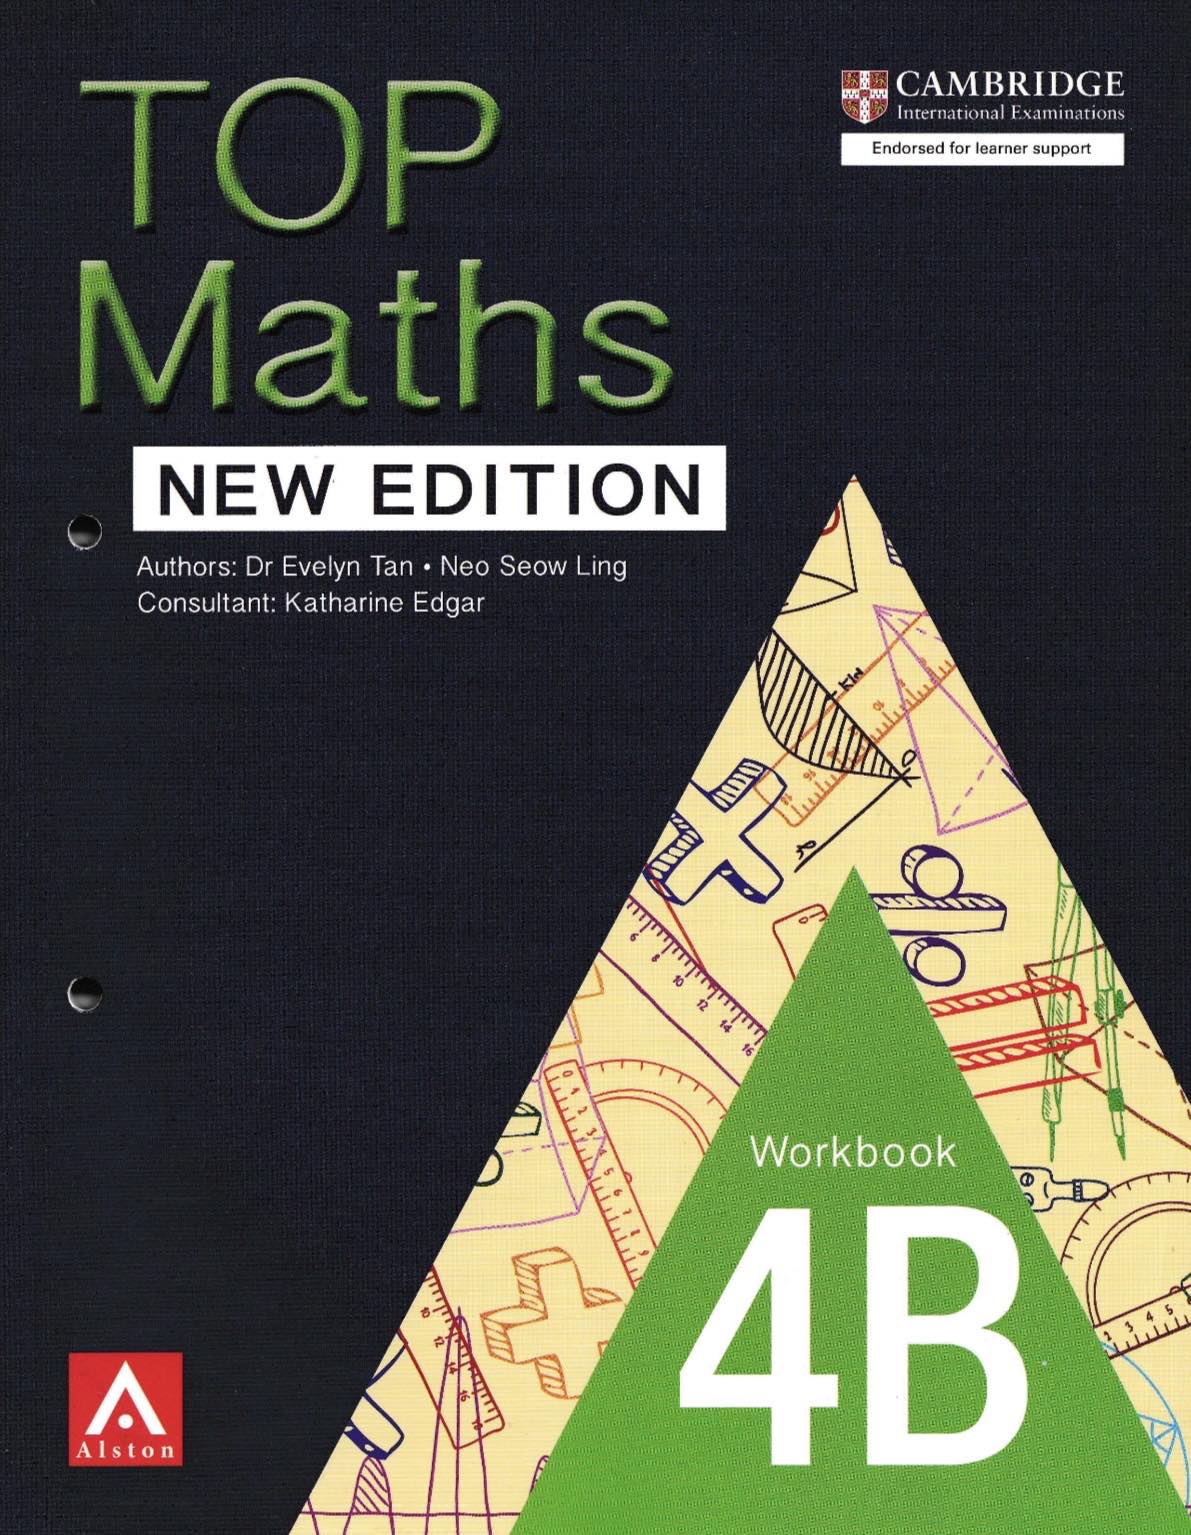 TOP Maths Stage 4 Textbook and Workbook